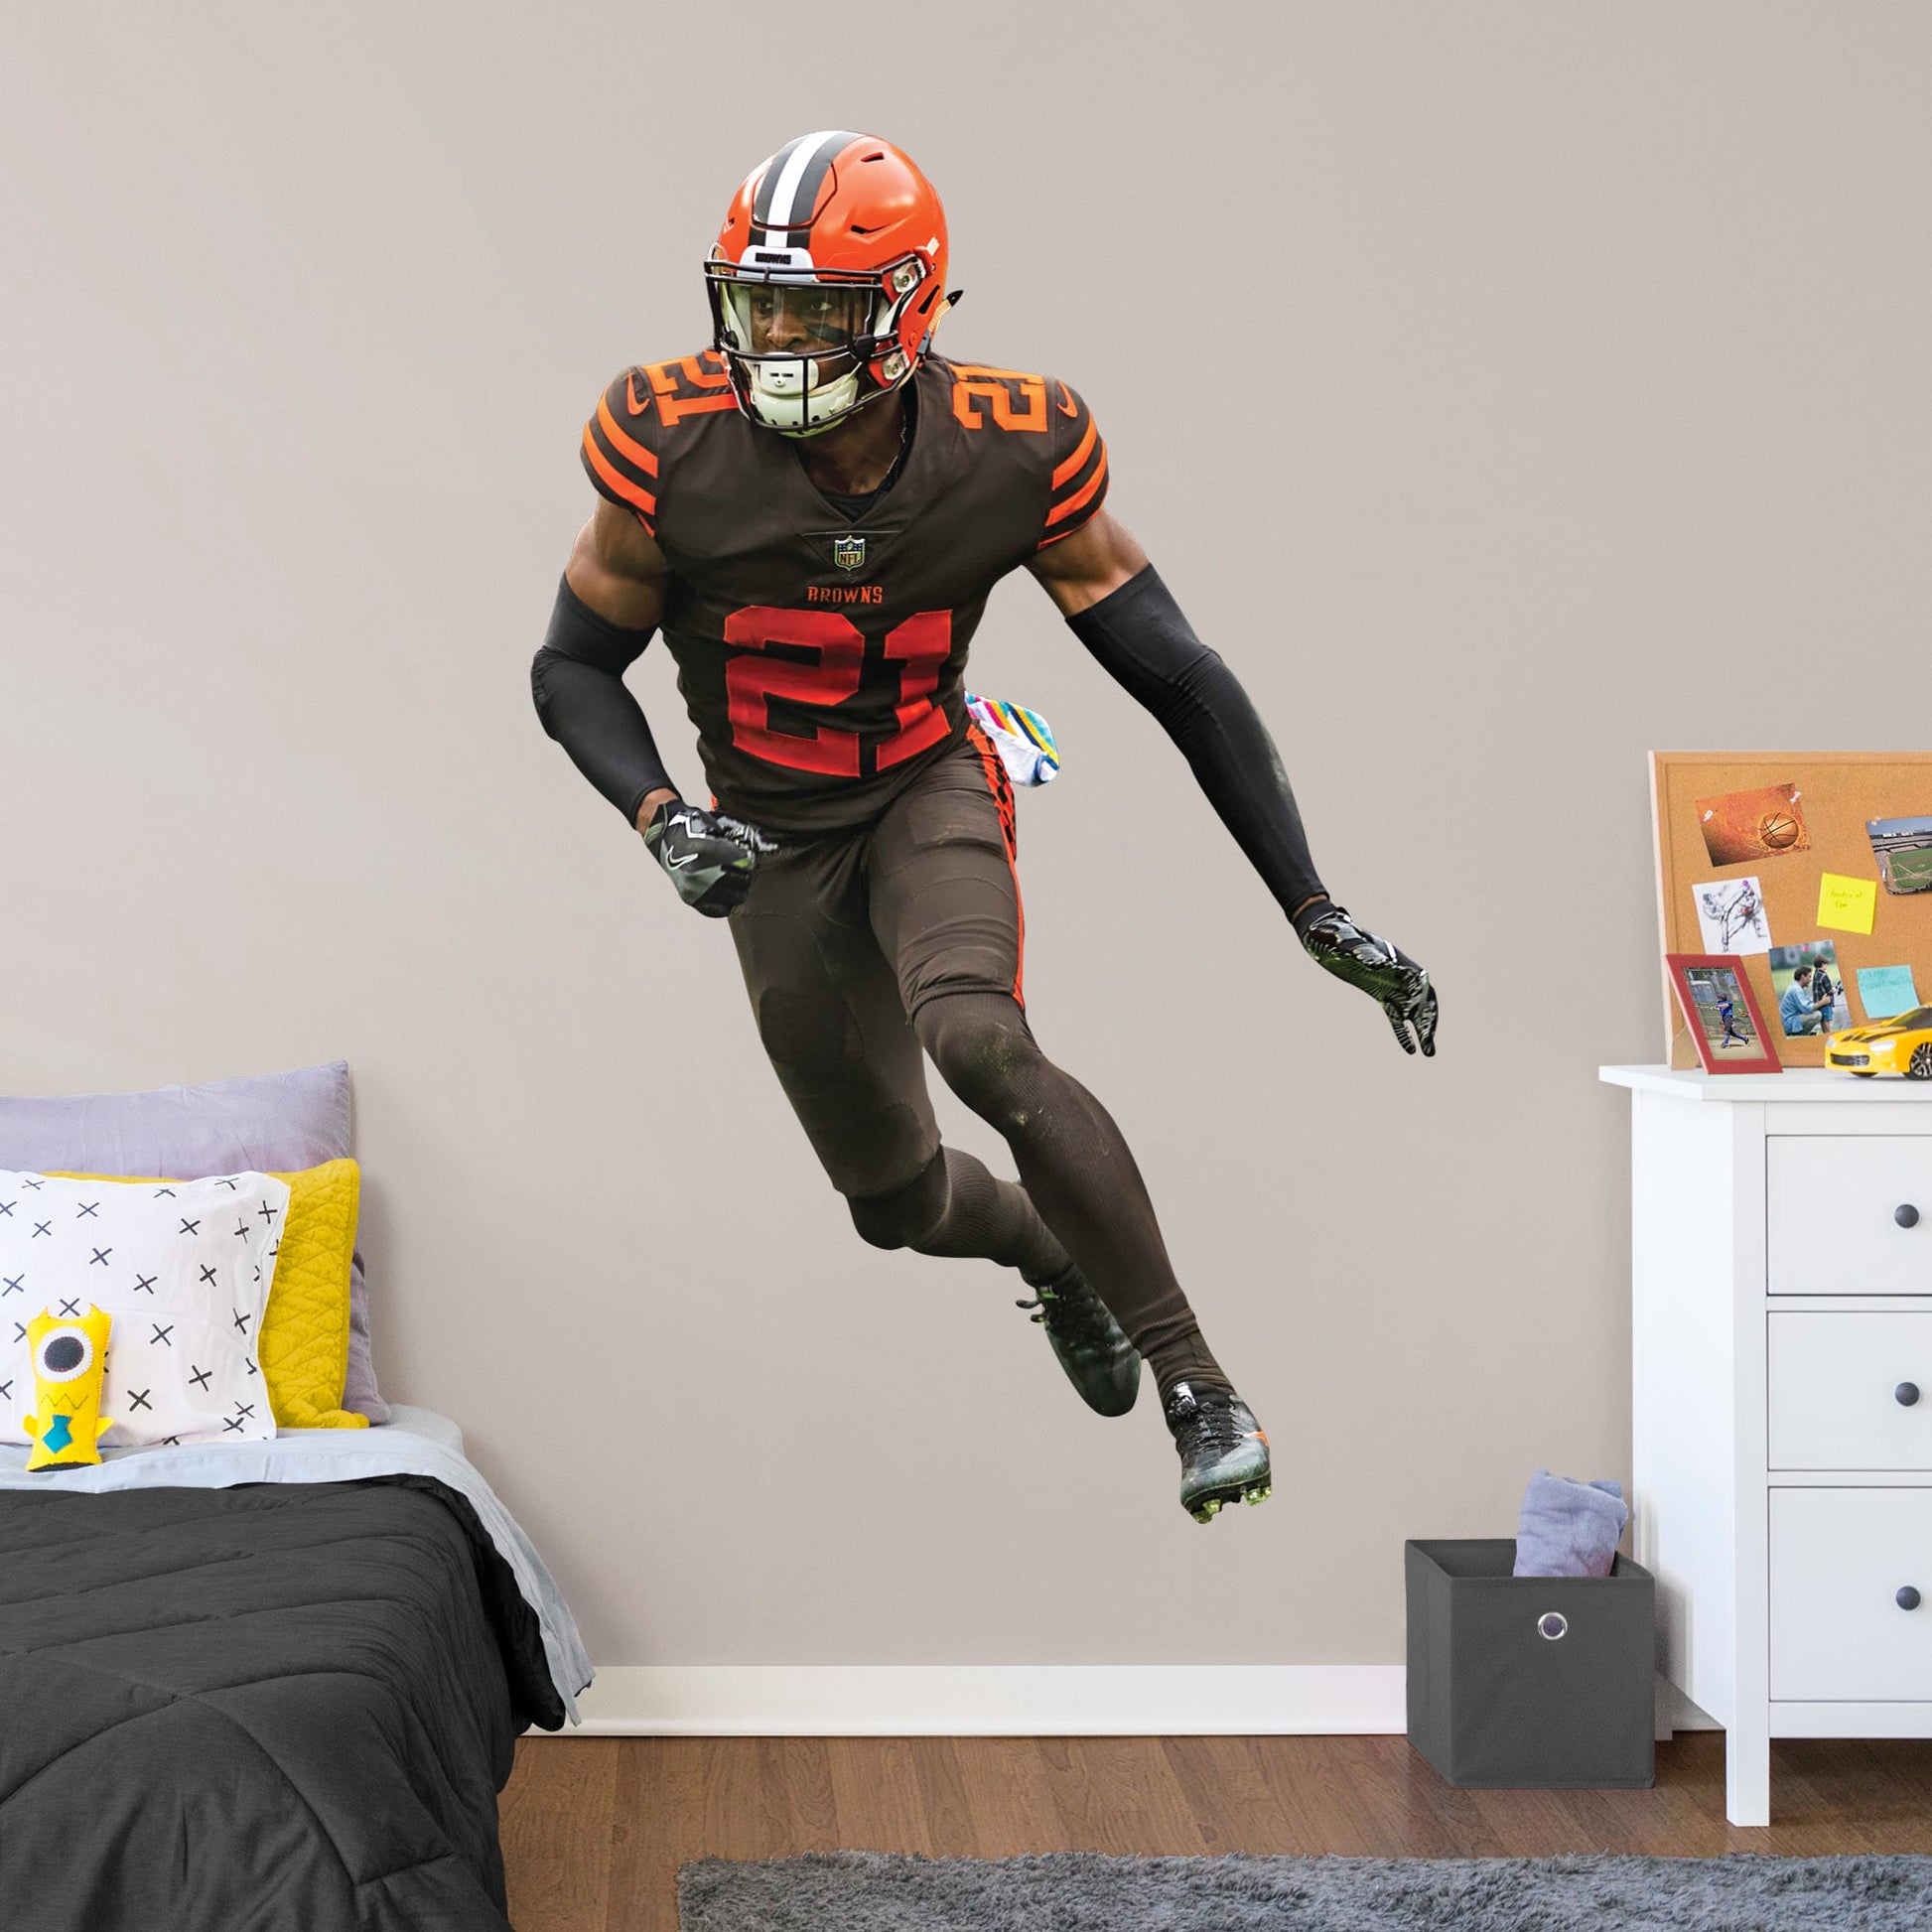 Life-Size Athlete + 2 Decals (49"W x 75"H) Bring the action of the NFL into your home with a wall decal of Denzel Ward! High quality, durable, and tear resistant, you'll be able to stick and move it as many times as you want to create the ultimate football experience in any room!